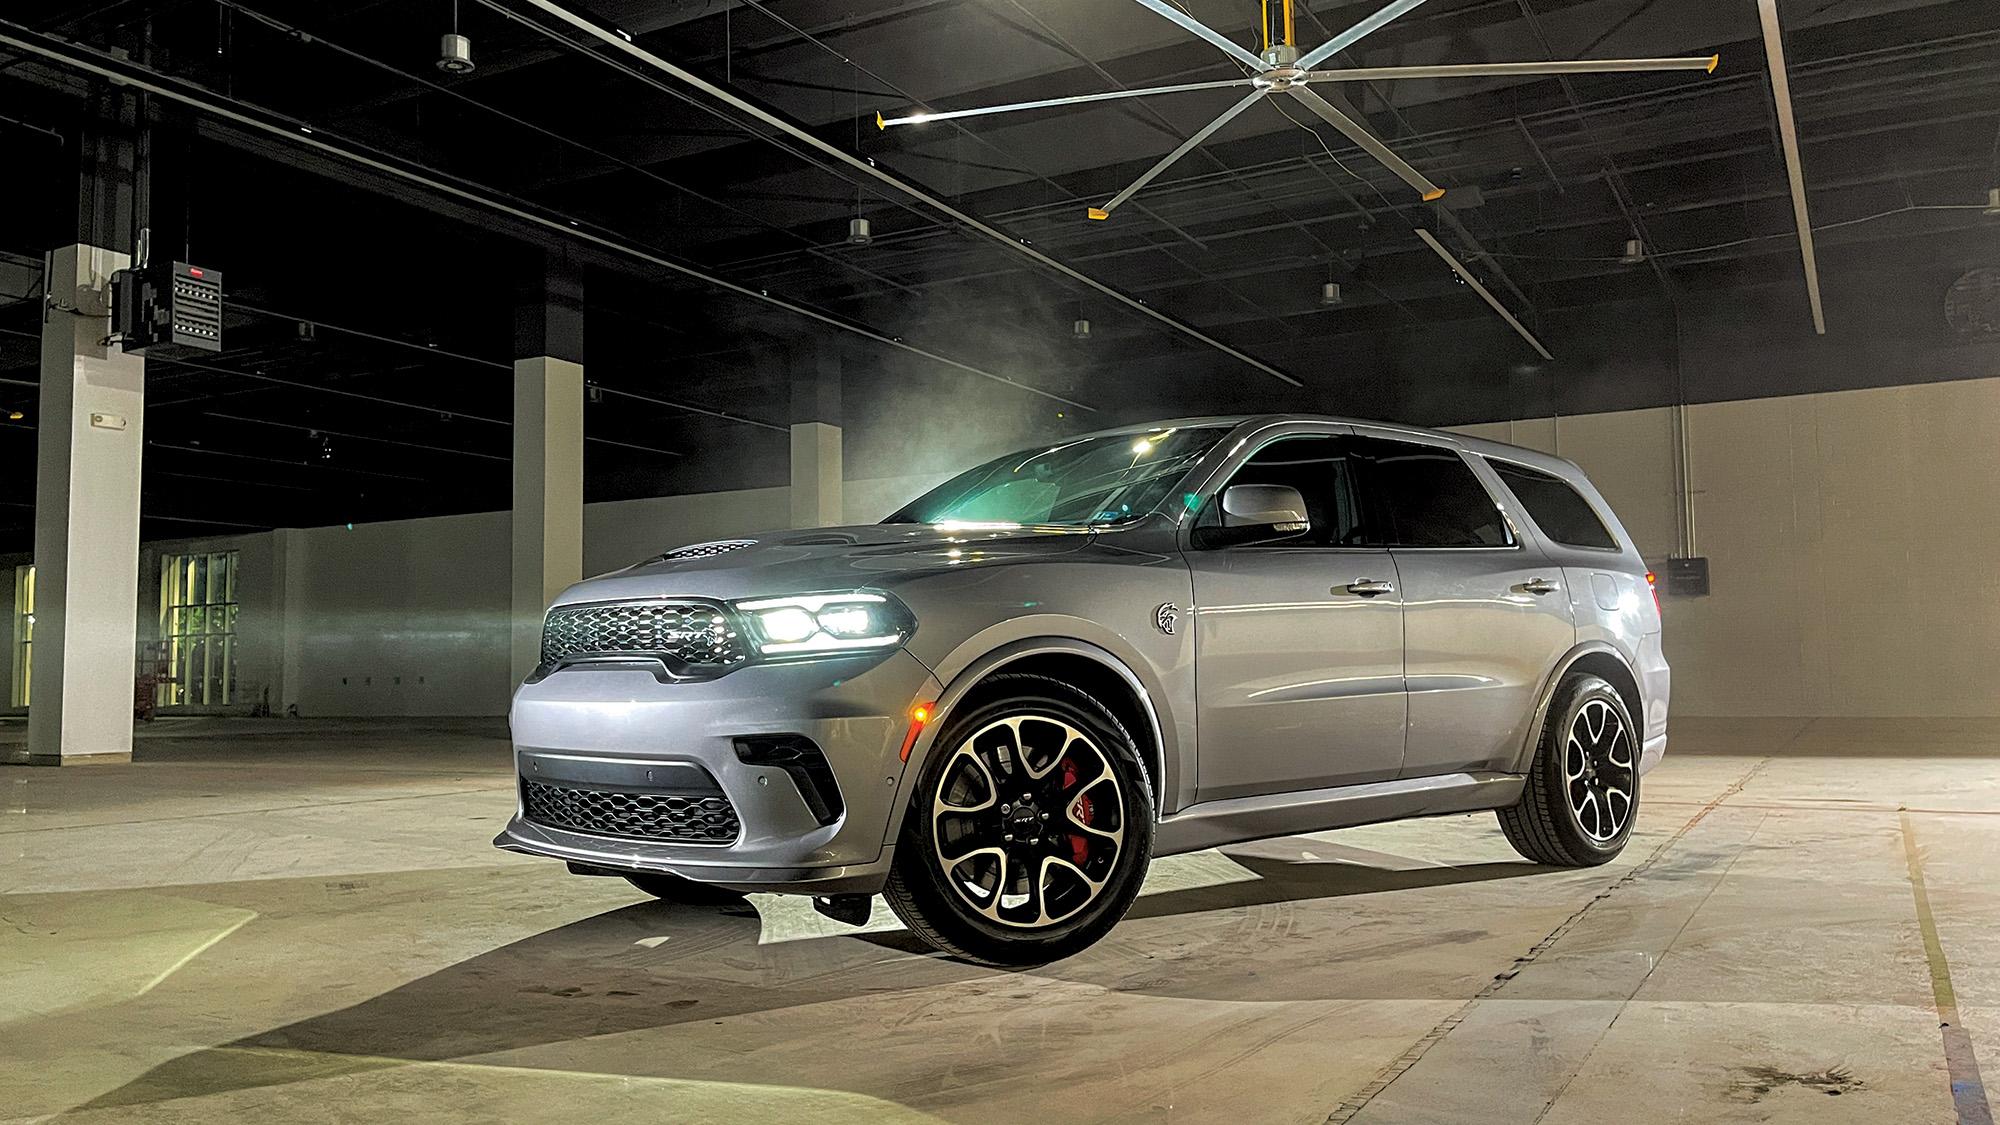 High-speed cross-country road trips were what the Hellcat Durango SRT was made for